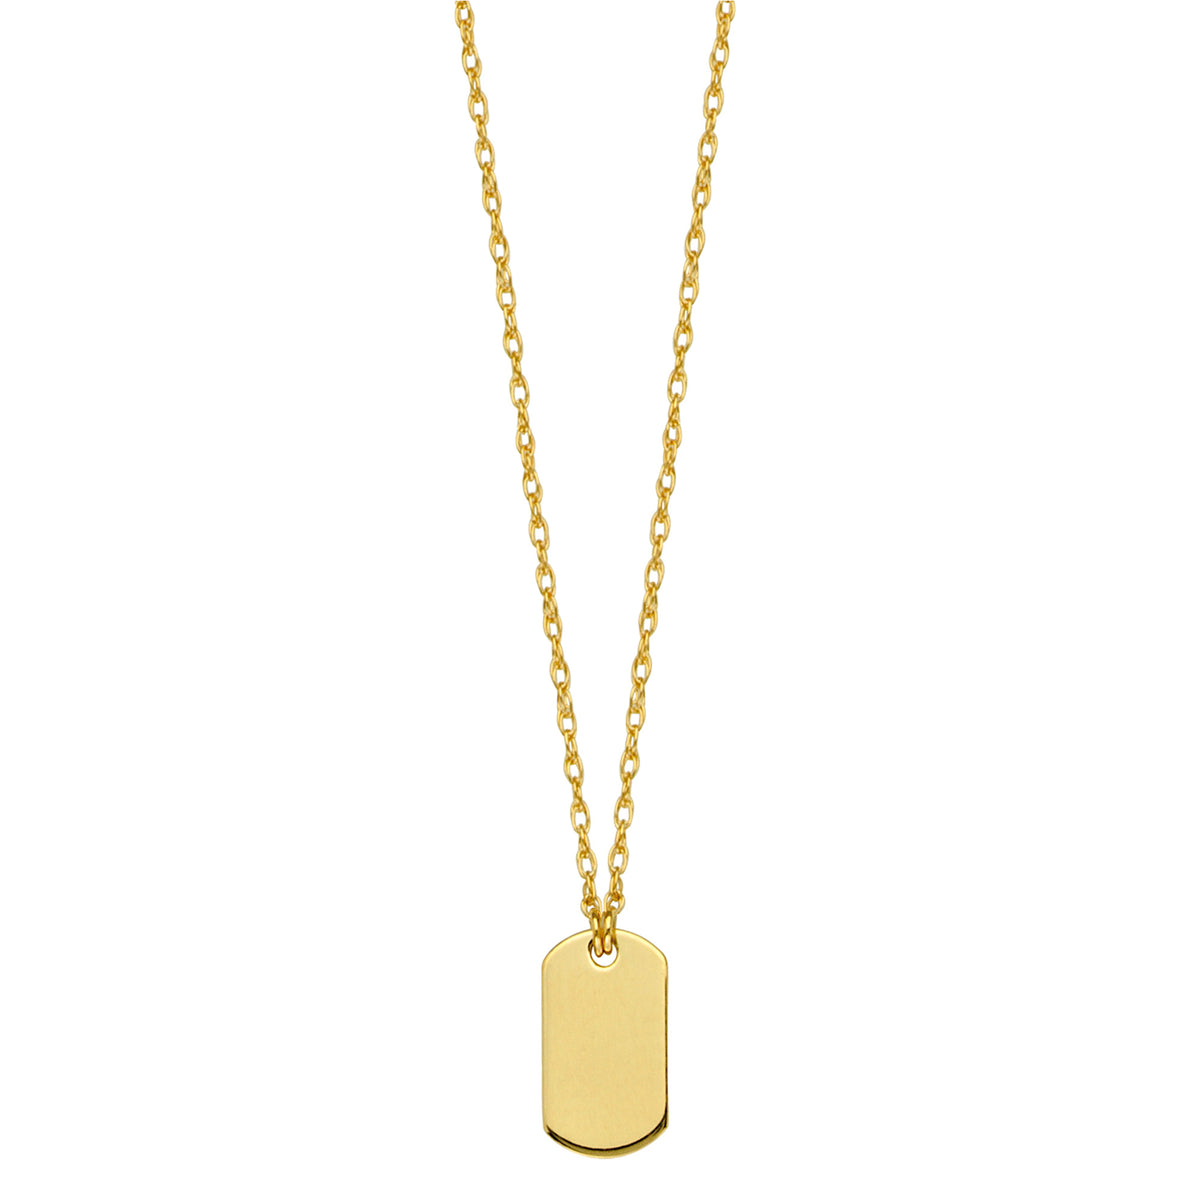 14K Yellow Gold Engravable Dog Tag Pendant Necklace, 16" To 18" Adjustable fine designer jewelry for men and women